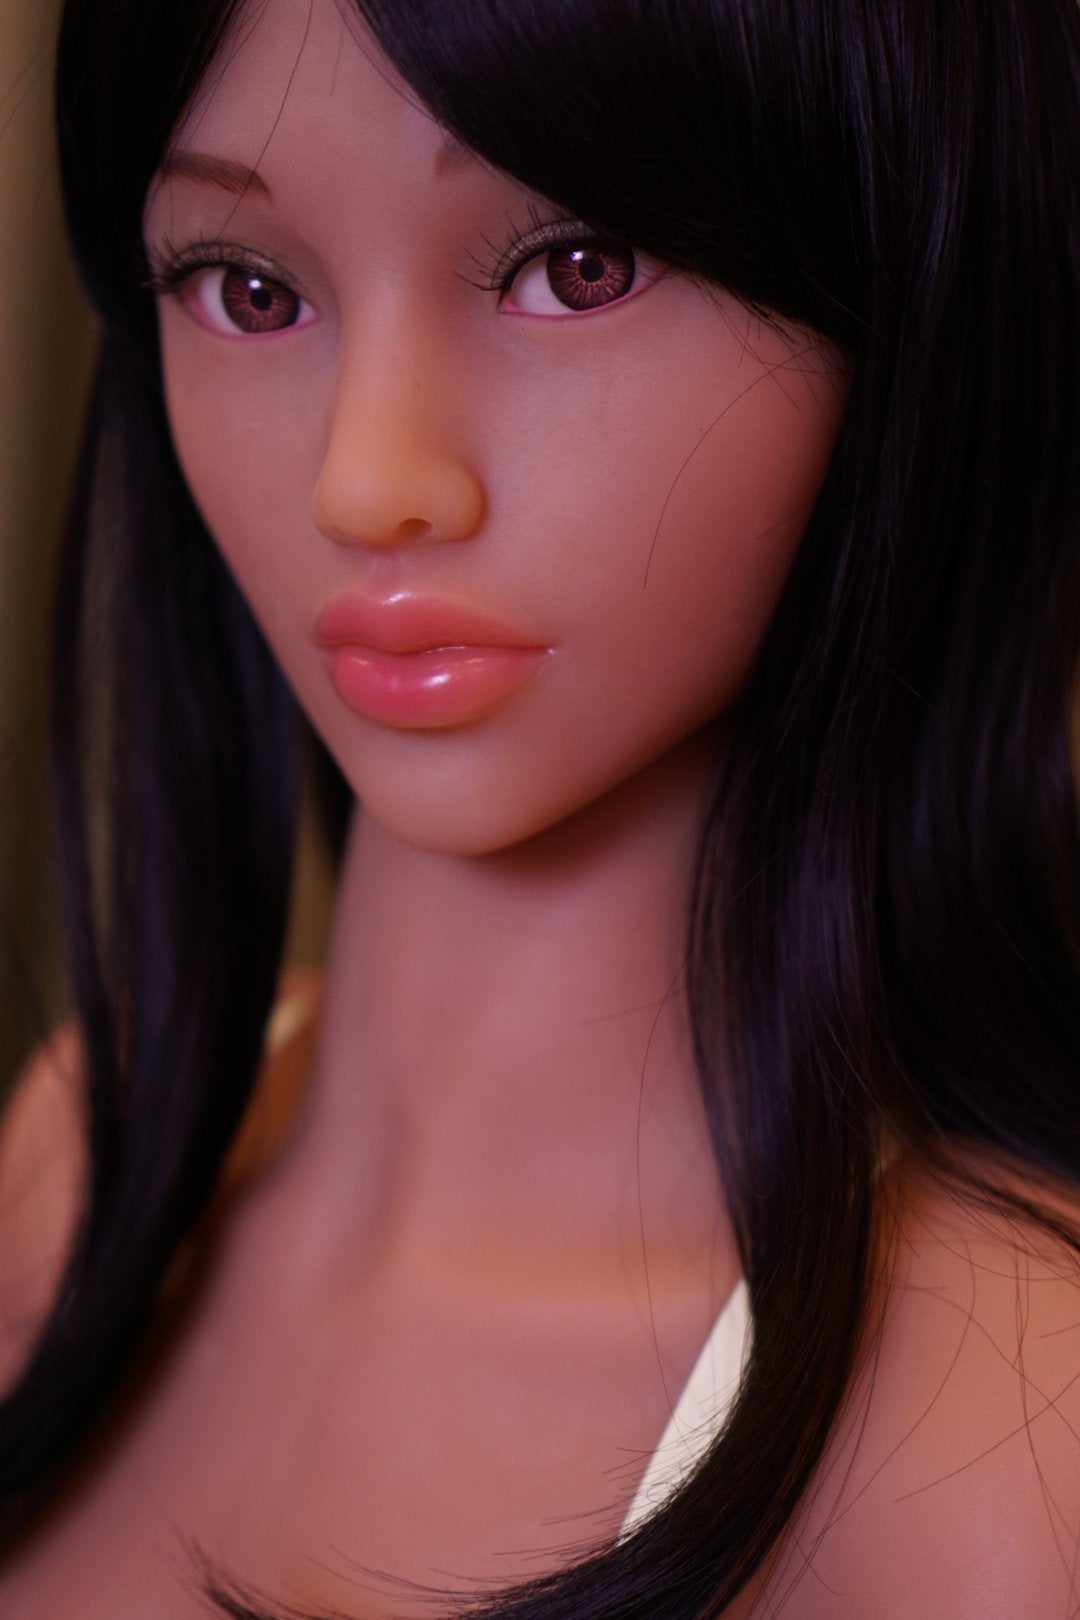 Doll Forever - Realistic Sex Doll - 5ft 5in (165cm) - Aaliyah - Love Dolls 4U